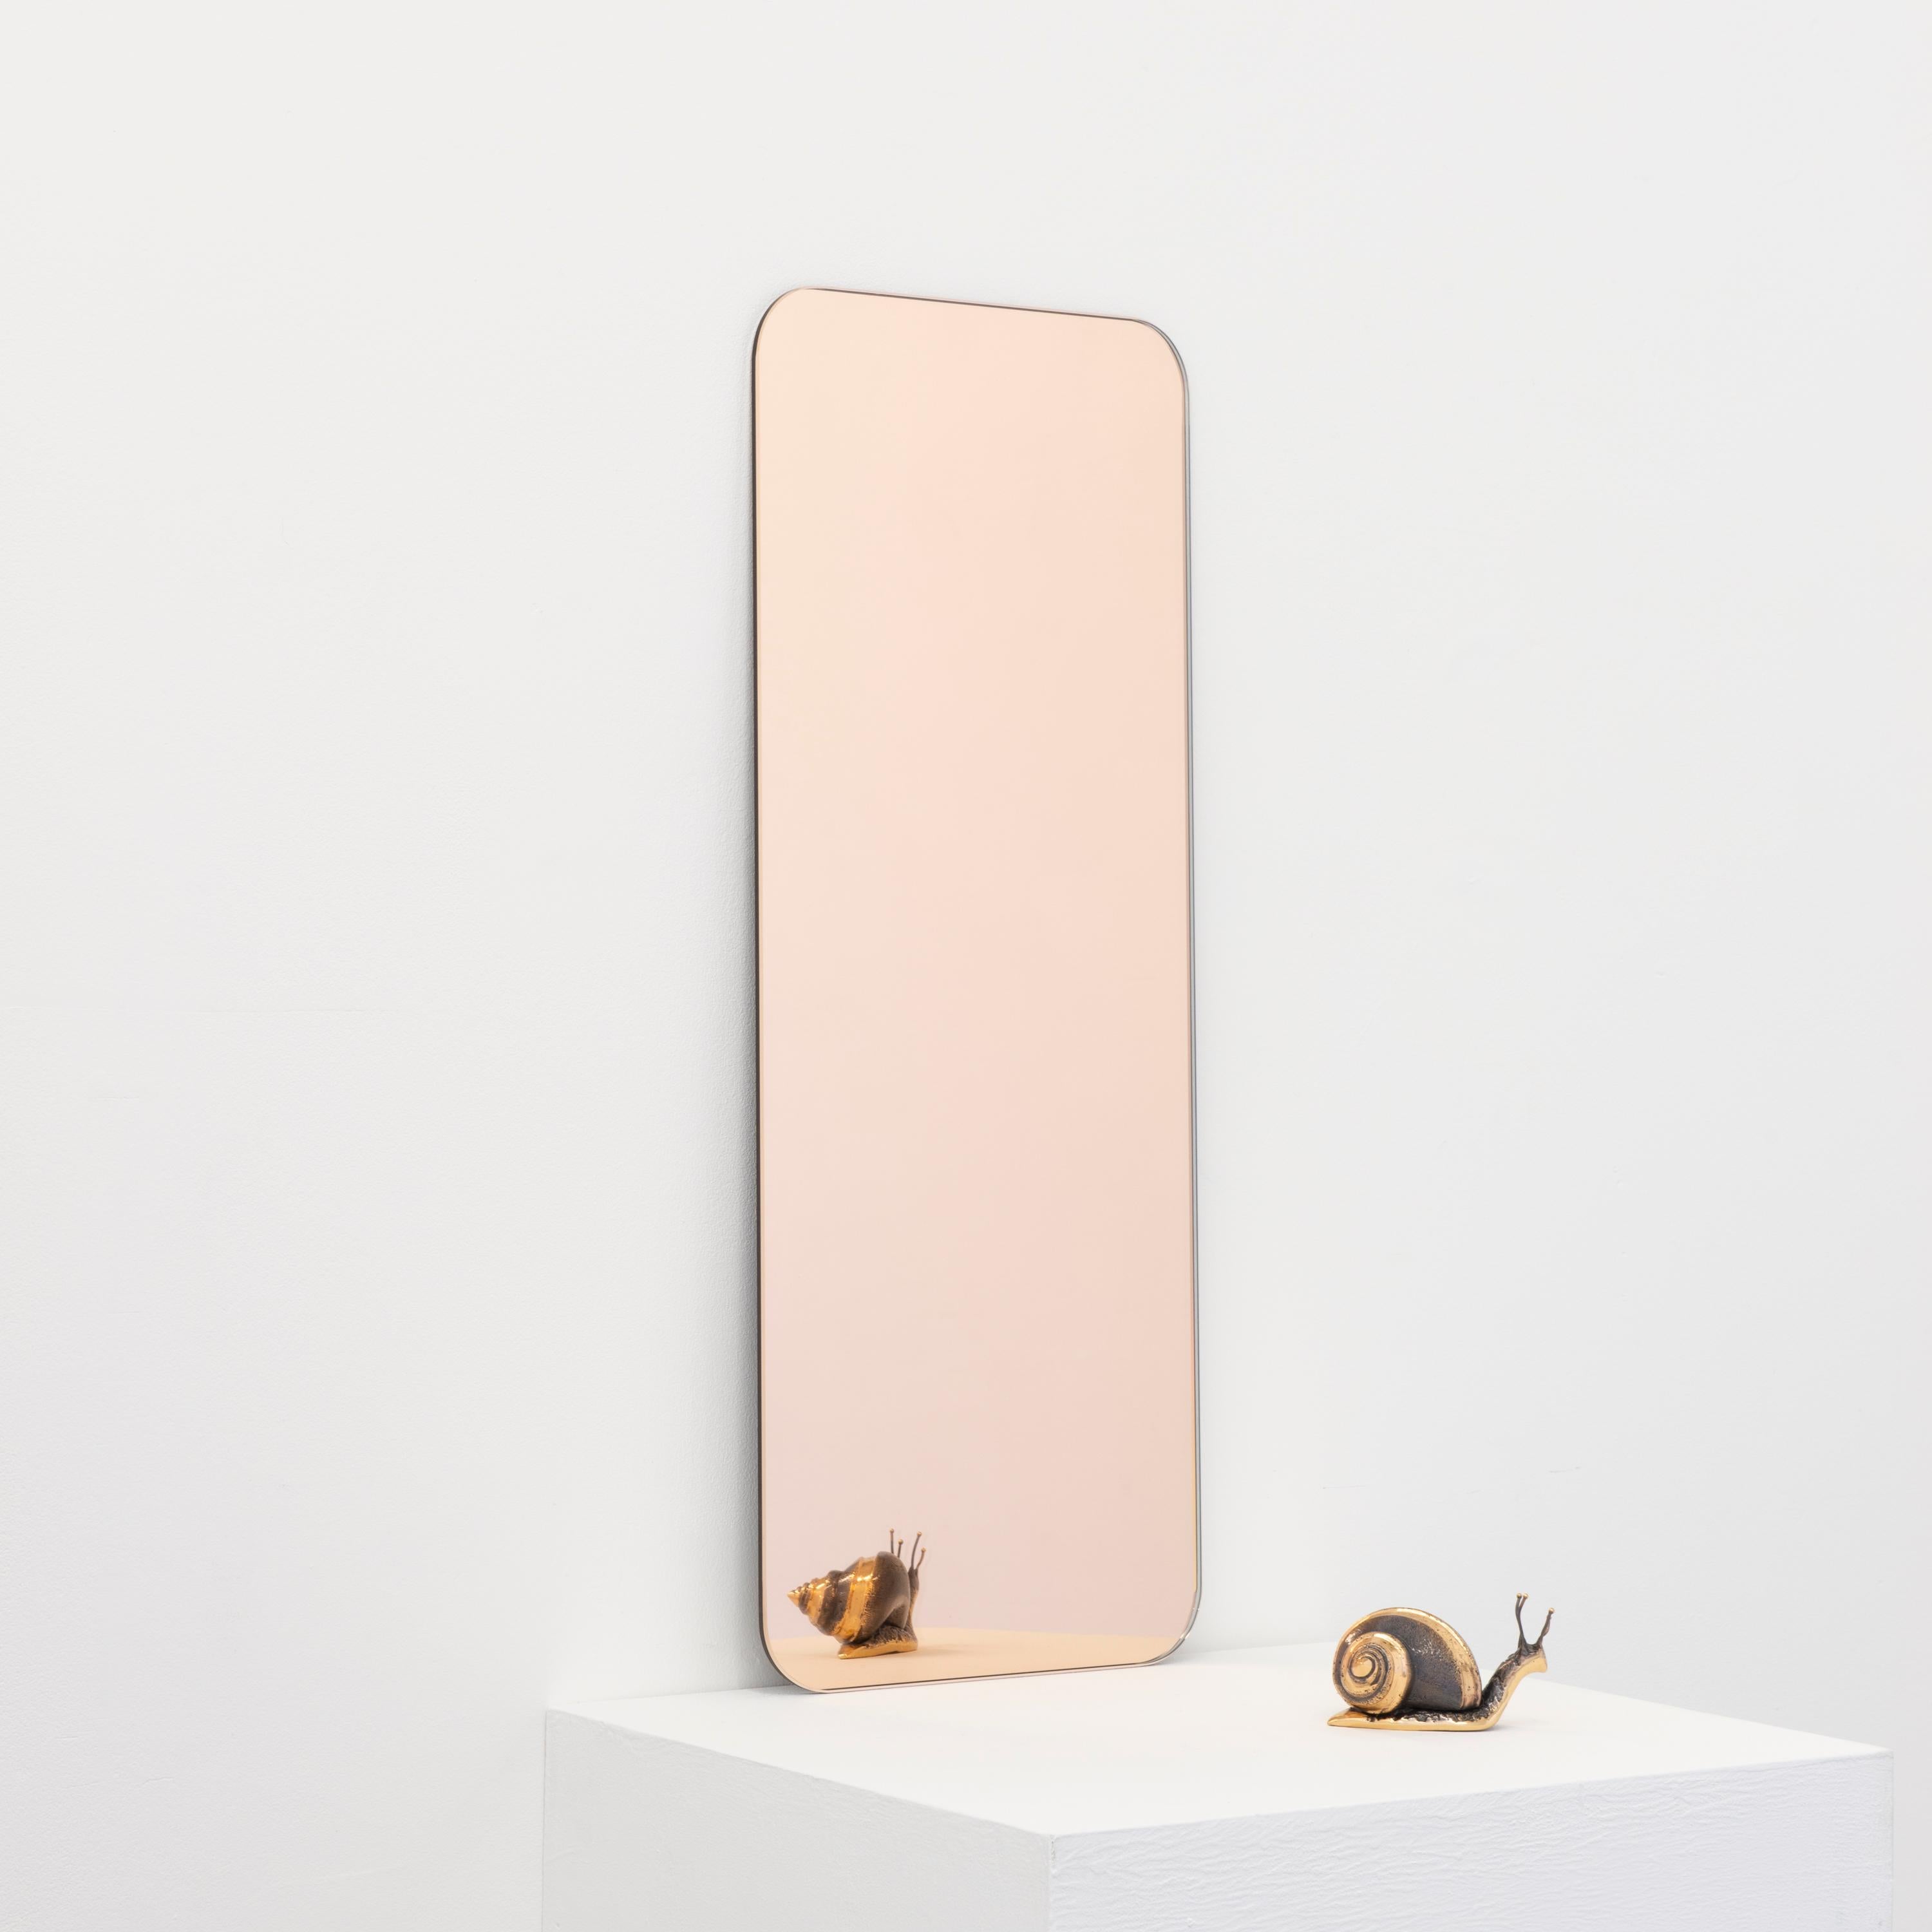 Quadris Rose Gold Rectangular Frameless Contemporary Mirror, Large In New Condition For Sale In London, GB